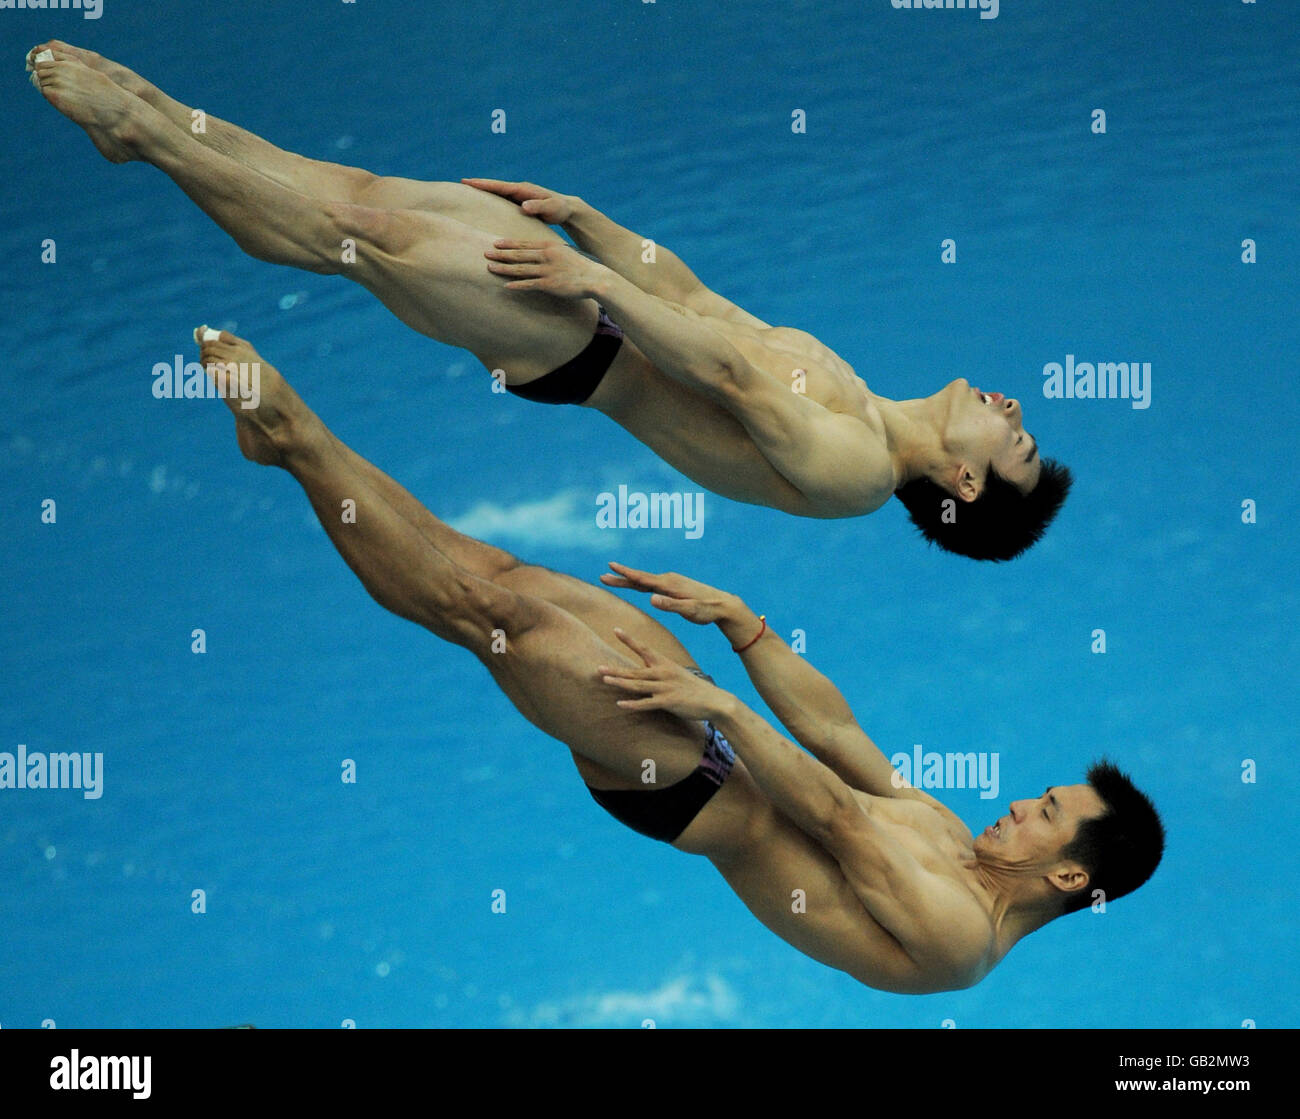 EMPICS ONLY EMPICS ONLY China's Feng Wang and Kai Qin complete in the Men's synchronised 3 metre springboard diving at the National Aquatics Centre in Beijing. PRESS ASSOCIATION Photo. Picture date: Wednesday August 13, 2008. See PA story. Photo credit should read: EMPICS Sport Stock Photo